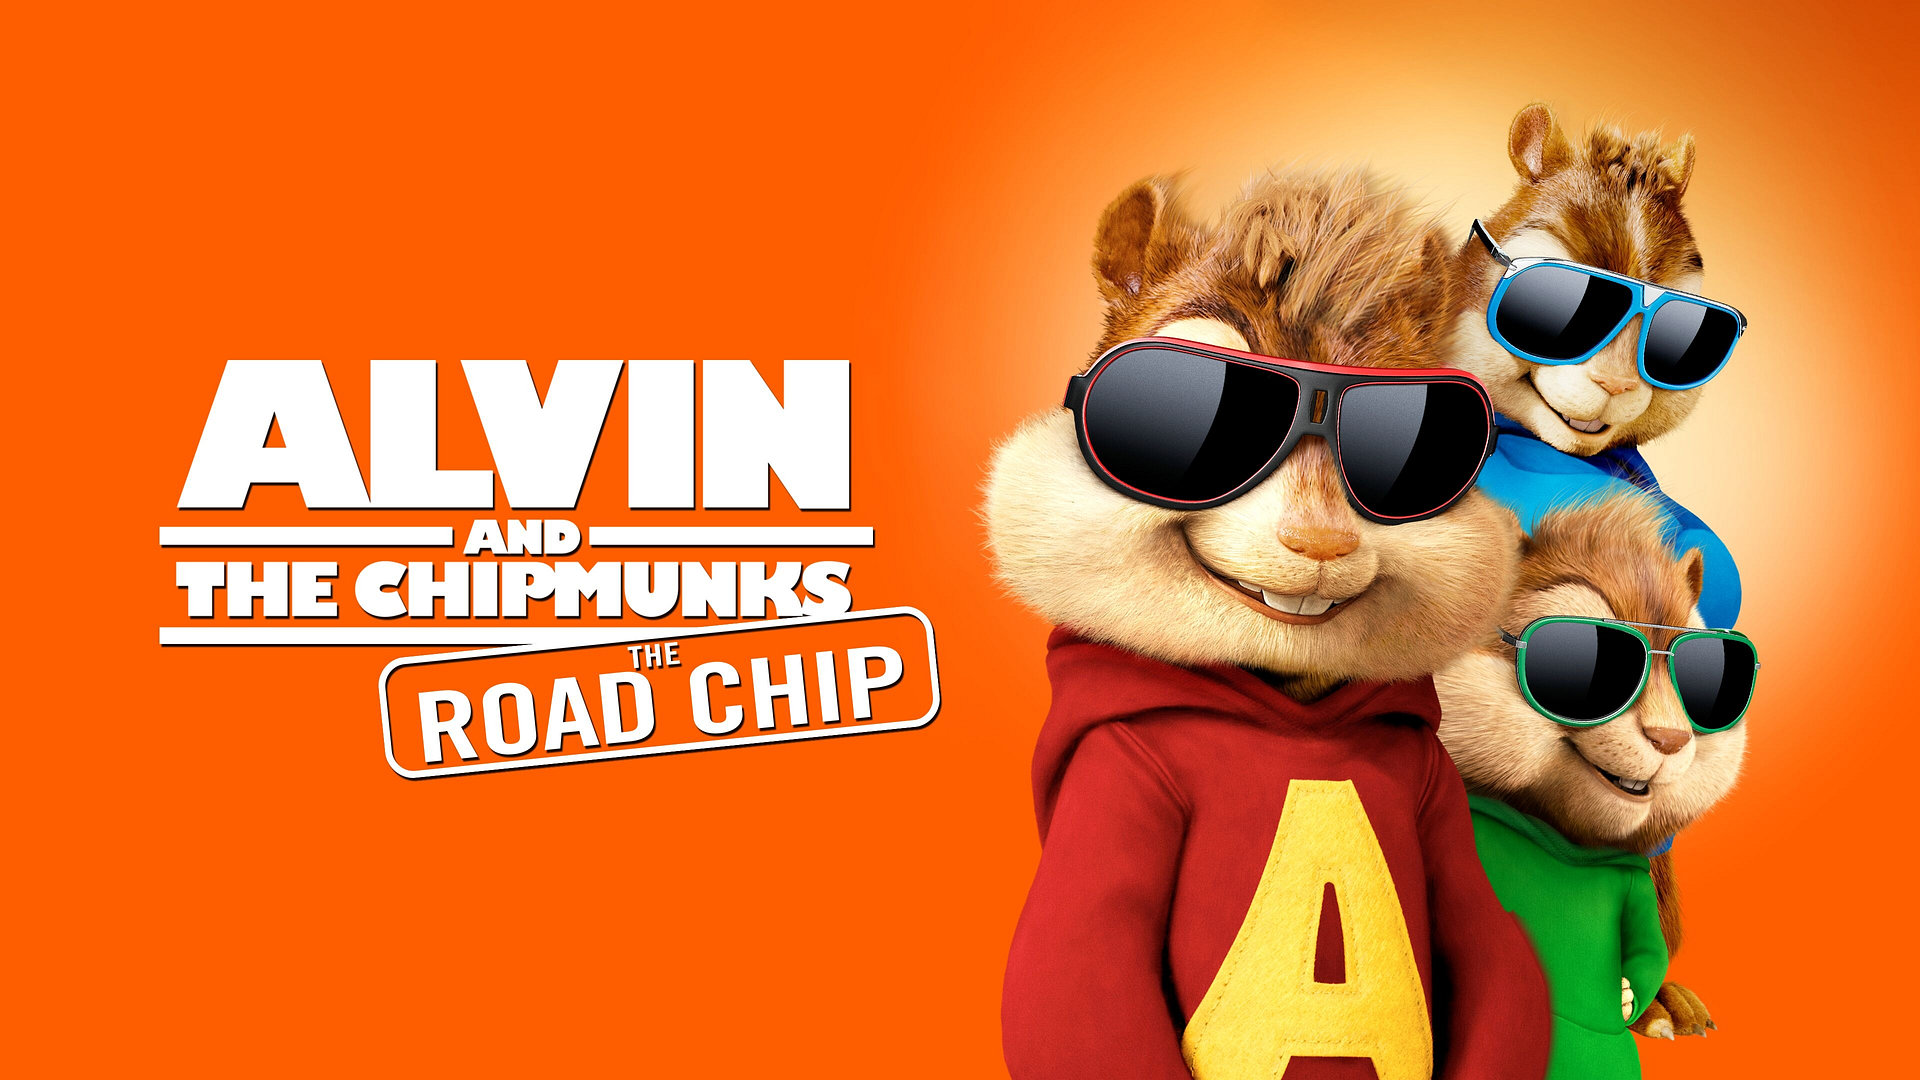 Alvin and the Chipmunks: The Road Chip (Original tale)